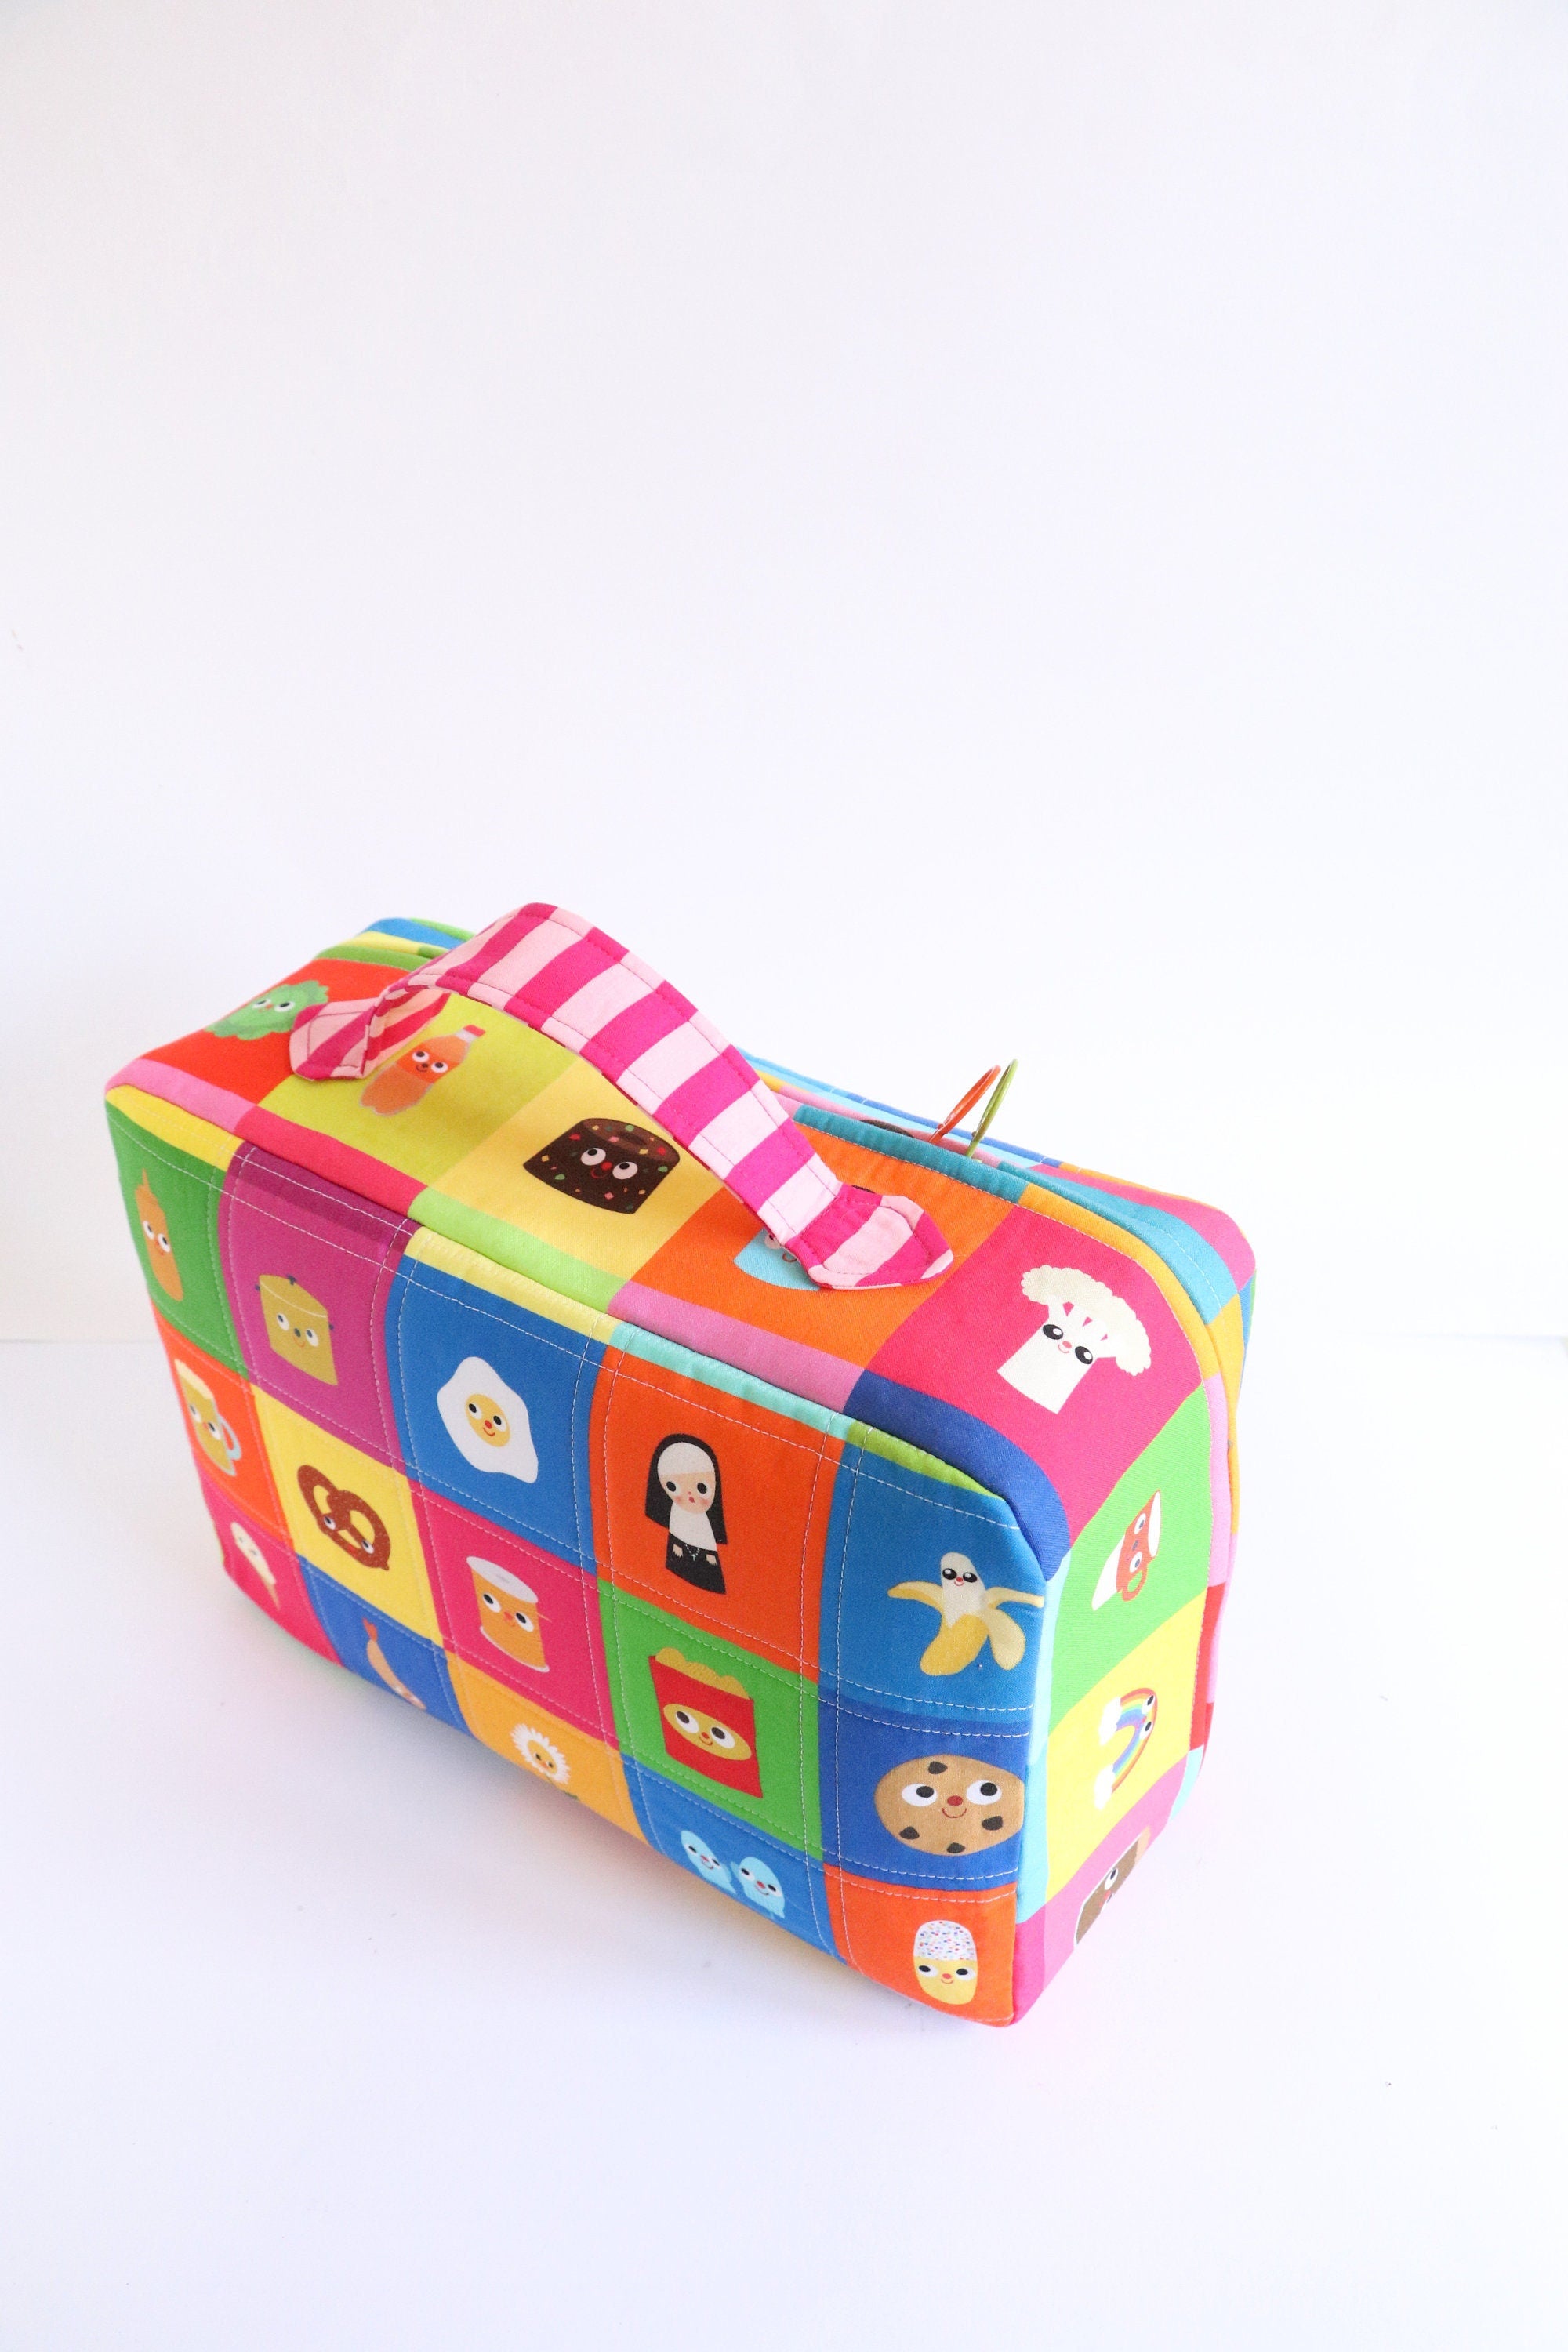 Small World Suitcase: Suitcase sewing pattern